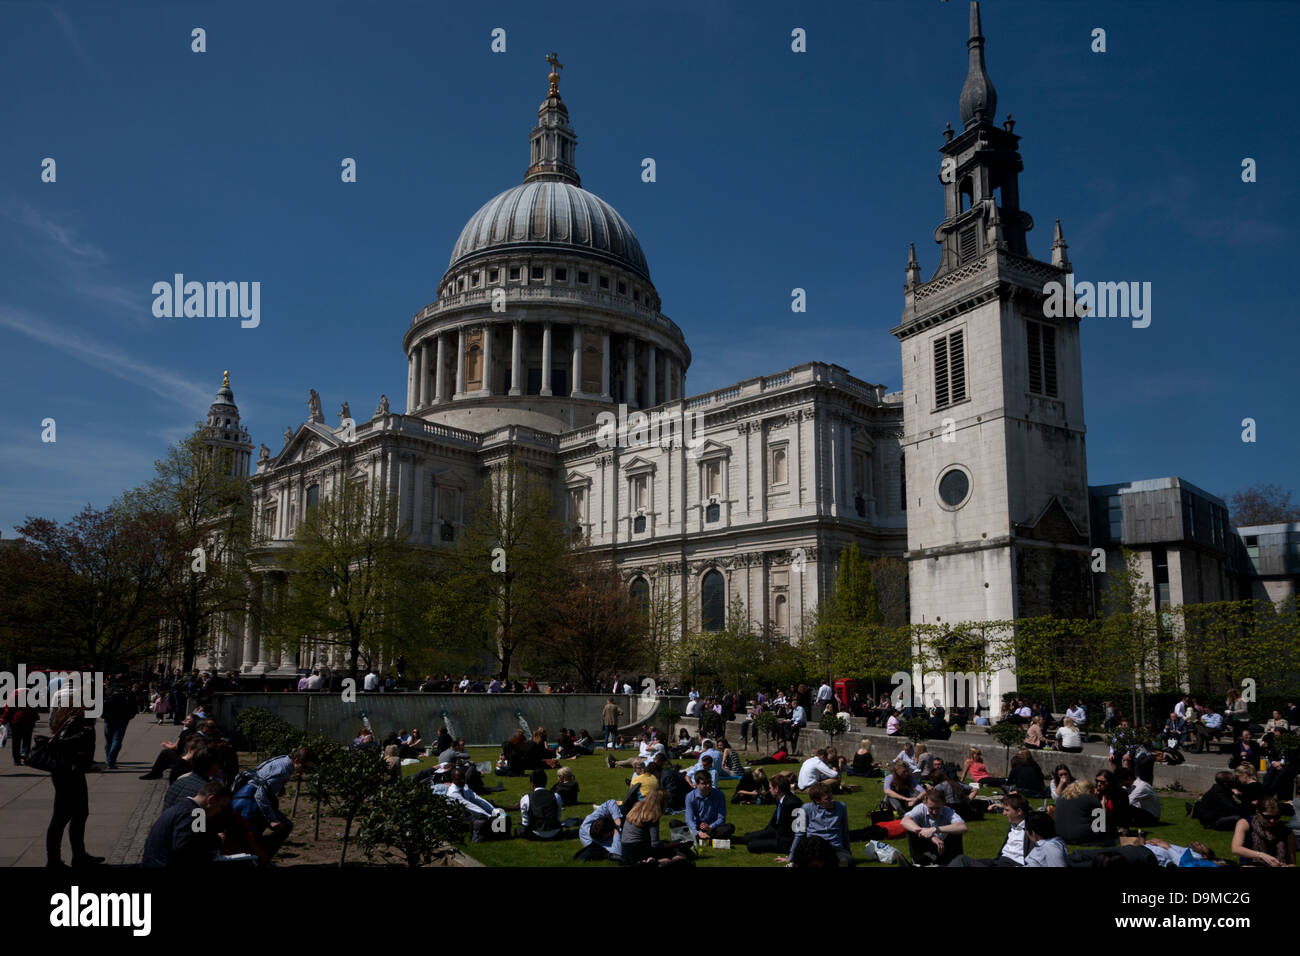 St Pauls Cathedral London England Stockfoto